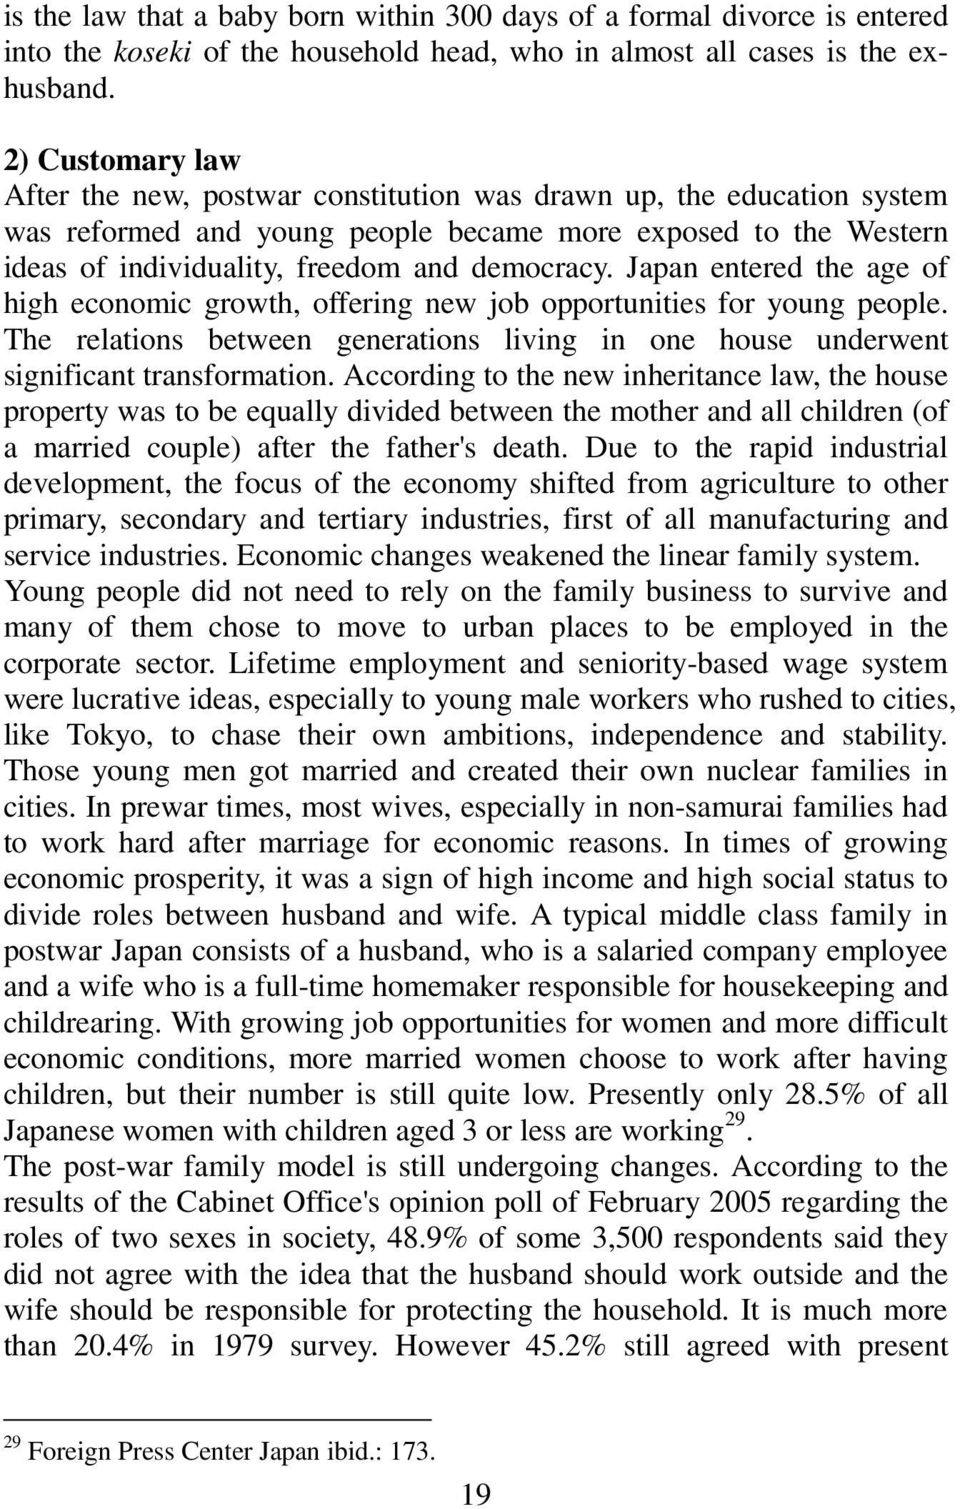 Japan entered the age of high economic growth, offering new job opportunities for young people. The relations between generations living in one house underwent significant transformation.